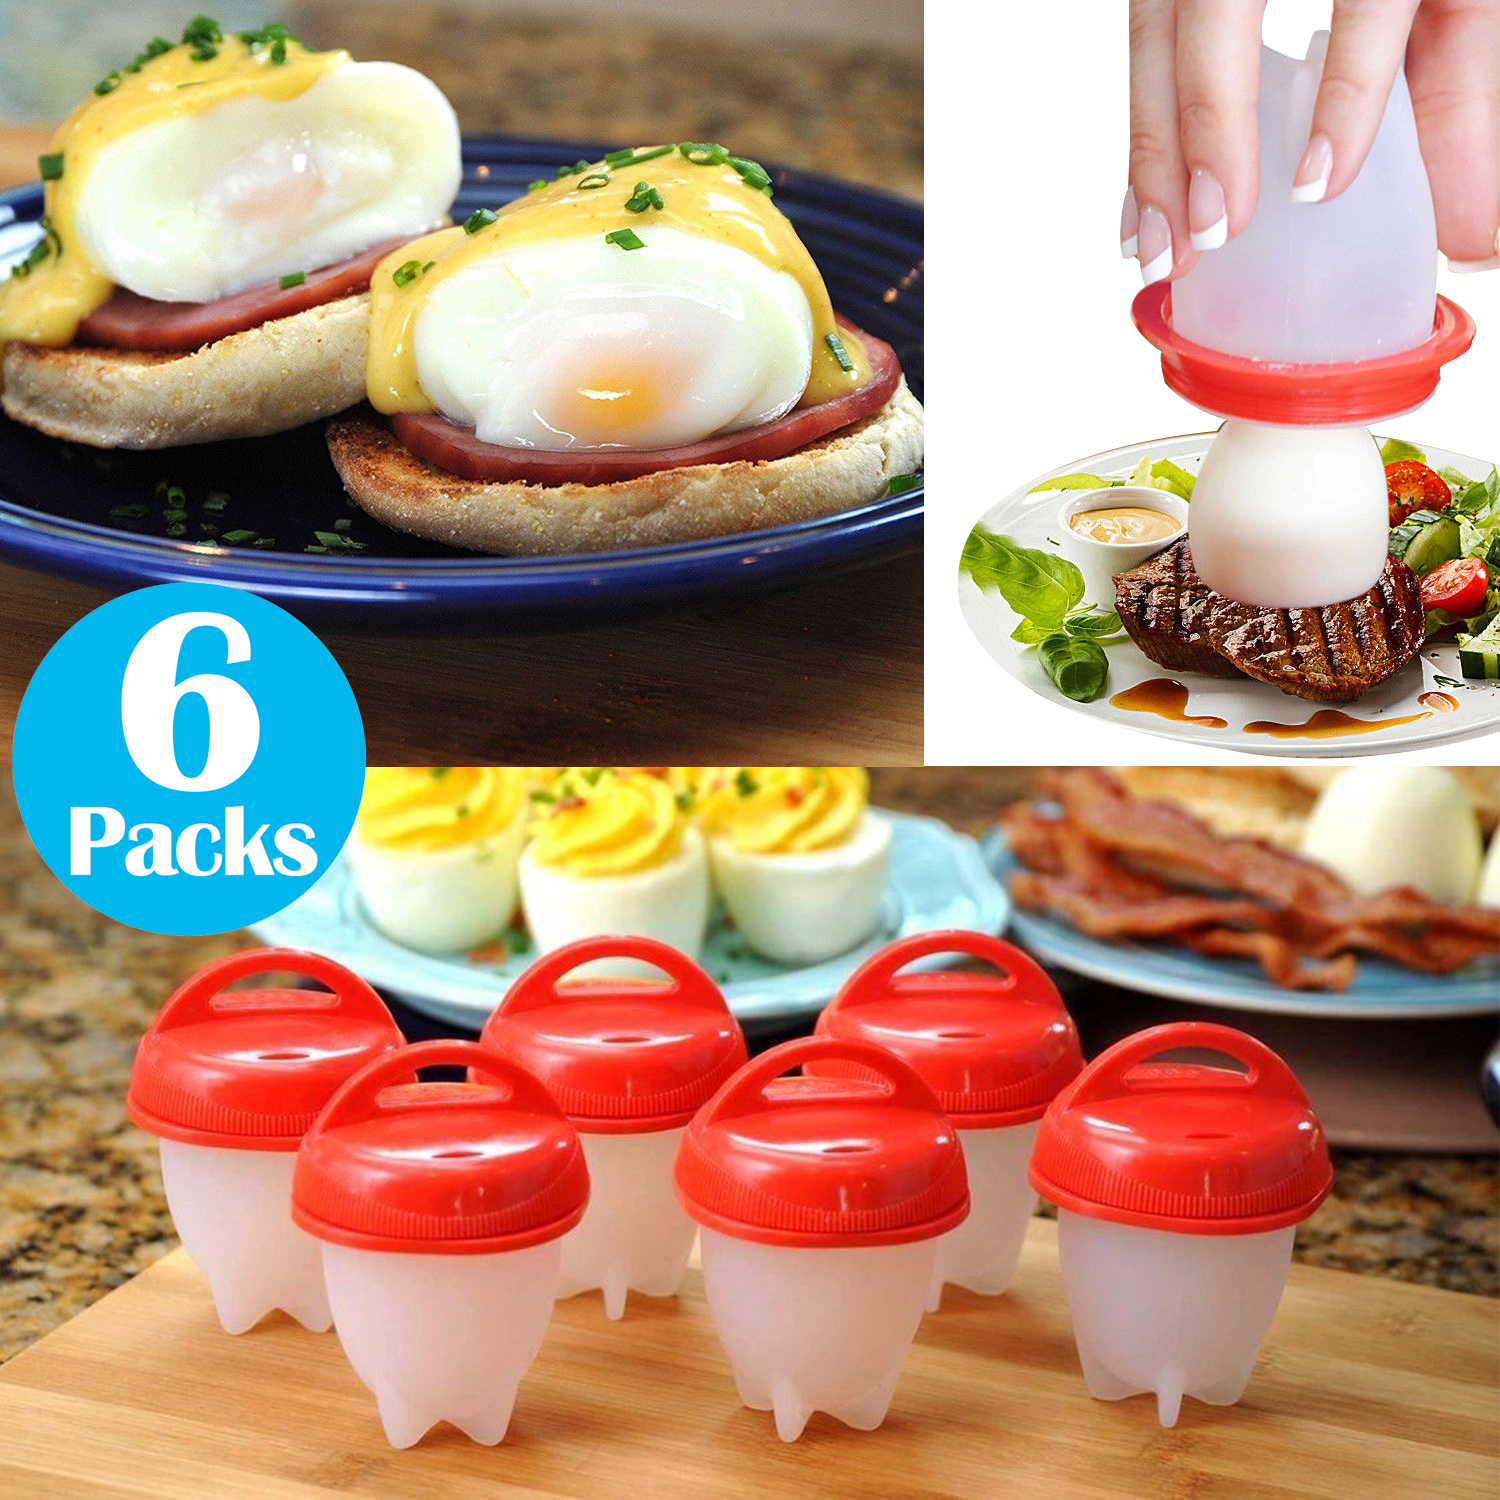 🎄Christmas Flash Sale-50% OFF!🎄Silicone Egg Cooker Set(6 Packs)